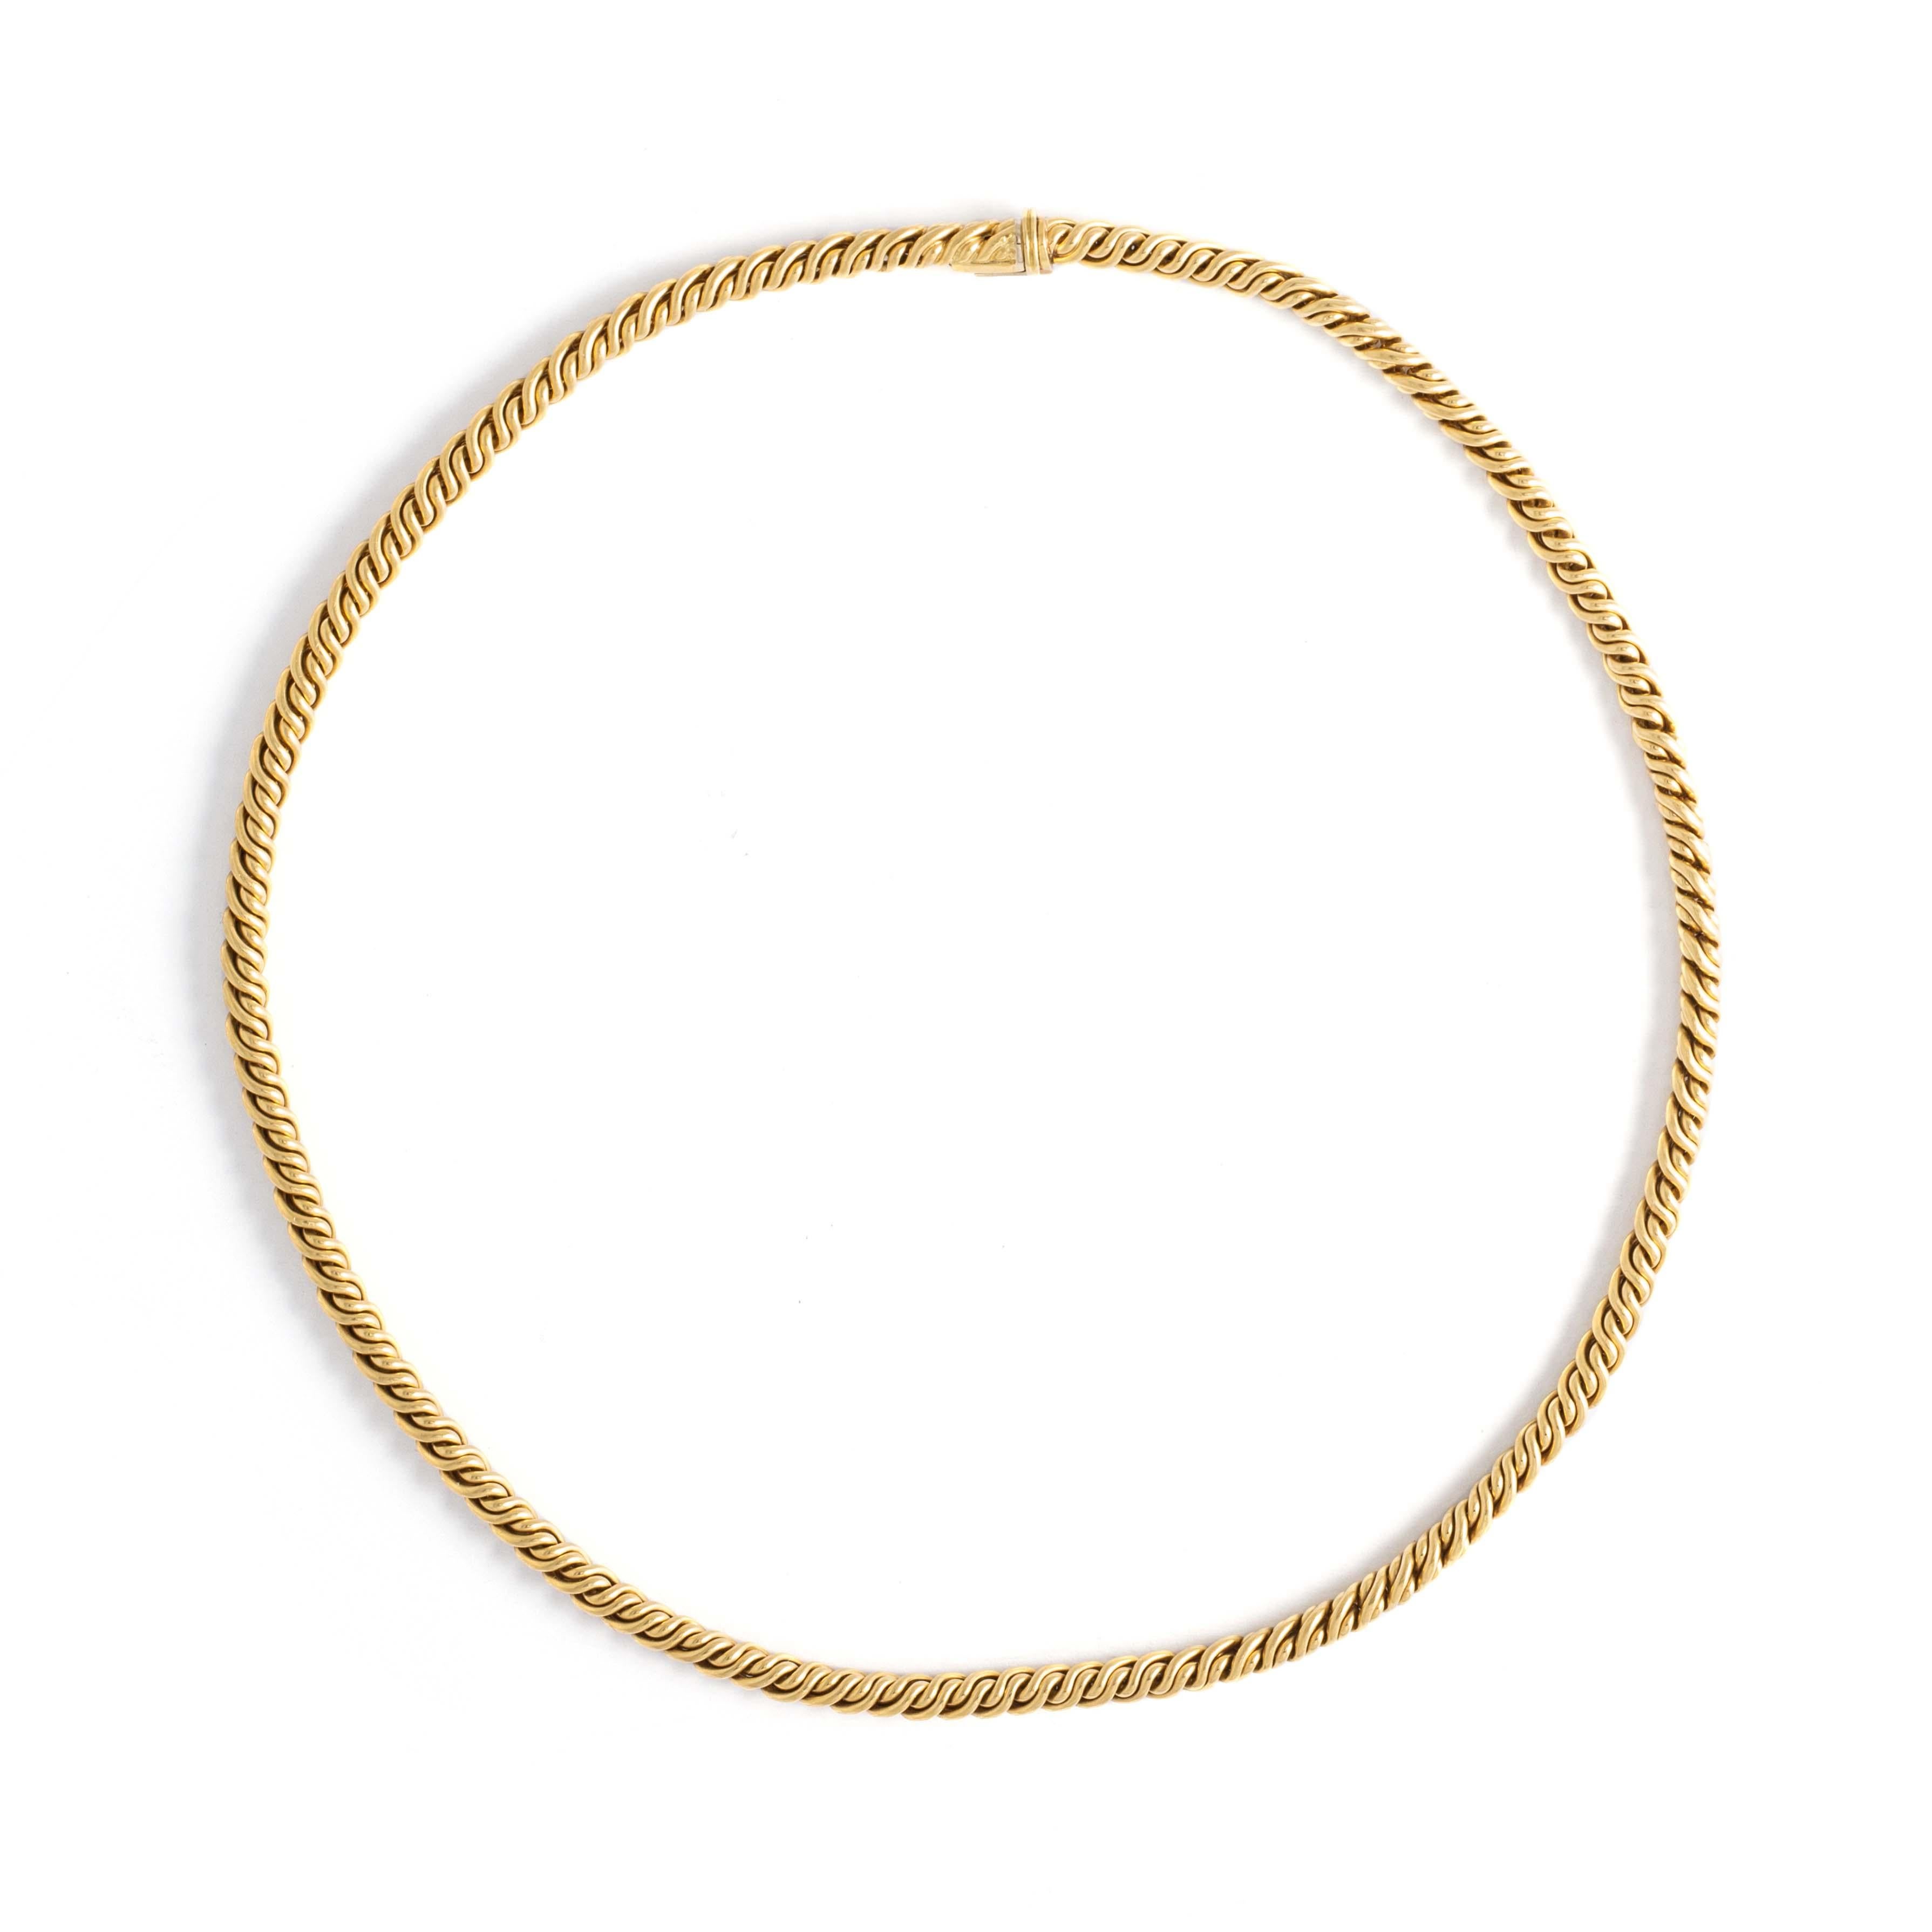 Pomellato. 18K yellow gold Chain. 
Signed Pomellato.
Wear consistent with age and use. Length: 40.00 centimeters. 
Gross weight: 51.38 grams.